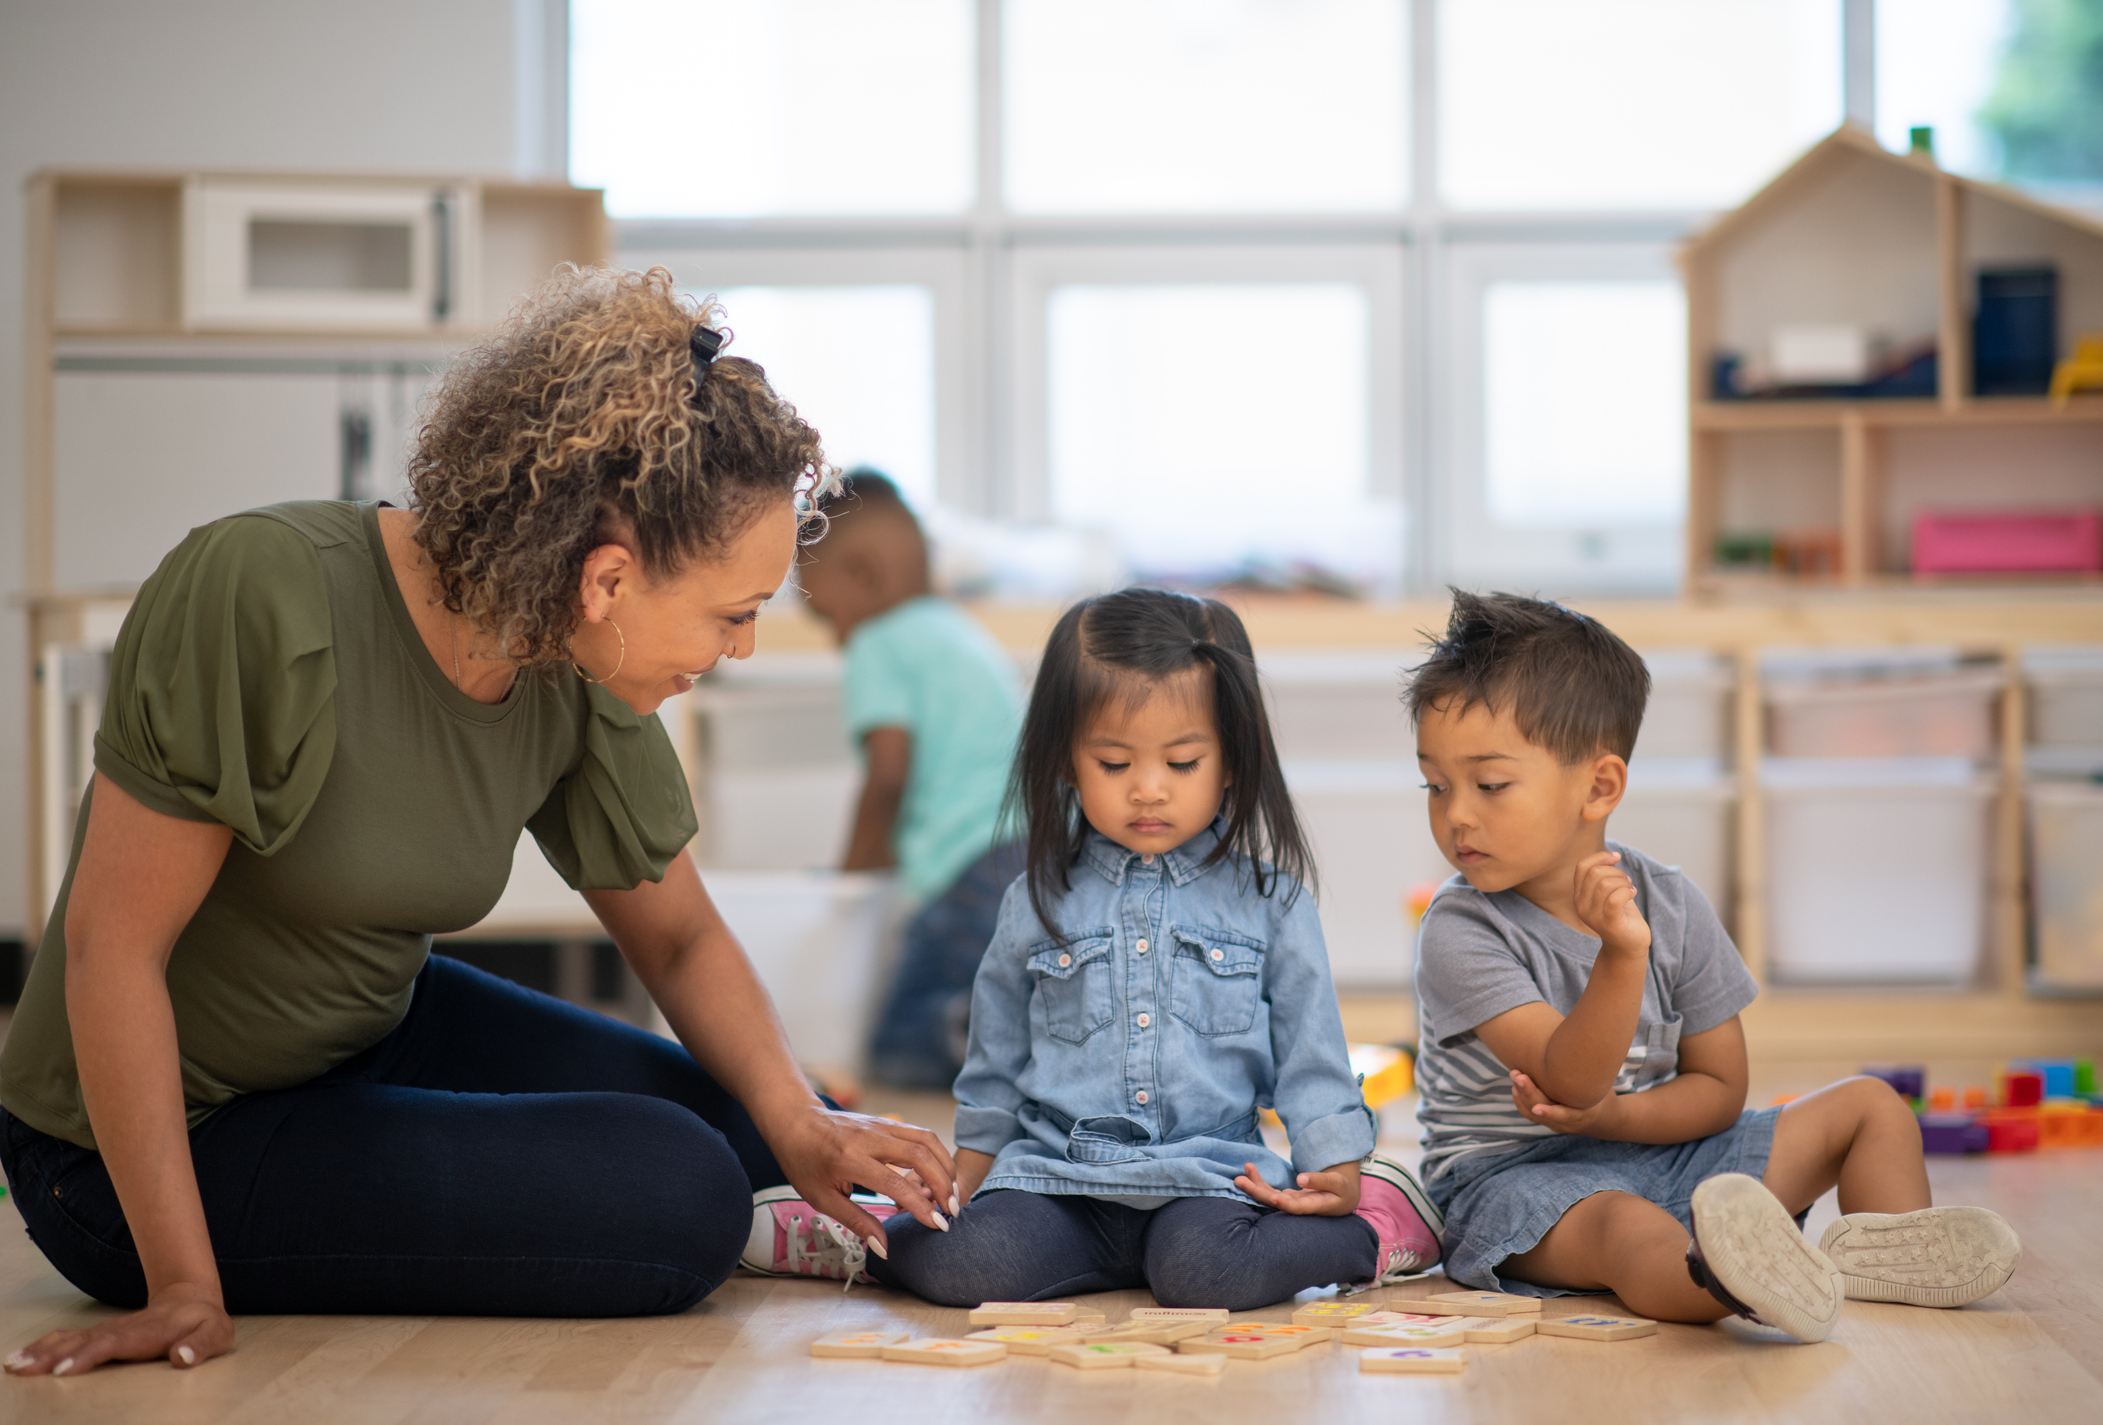 Easing anxiety in kindergarten children: How you can support parents